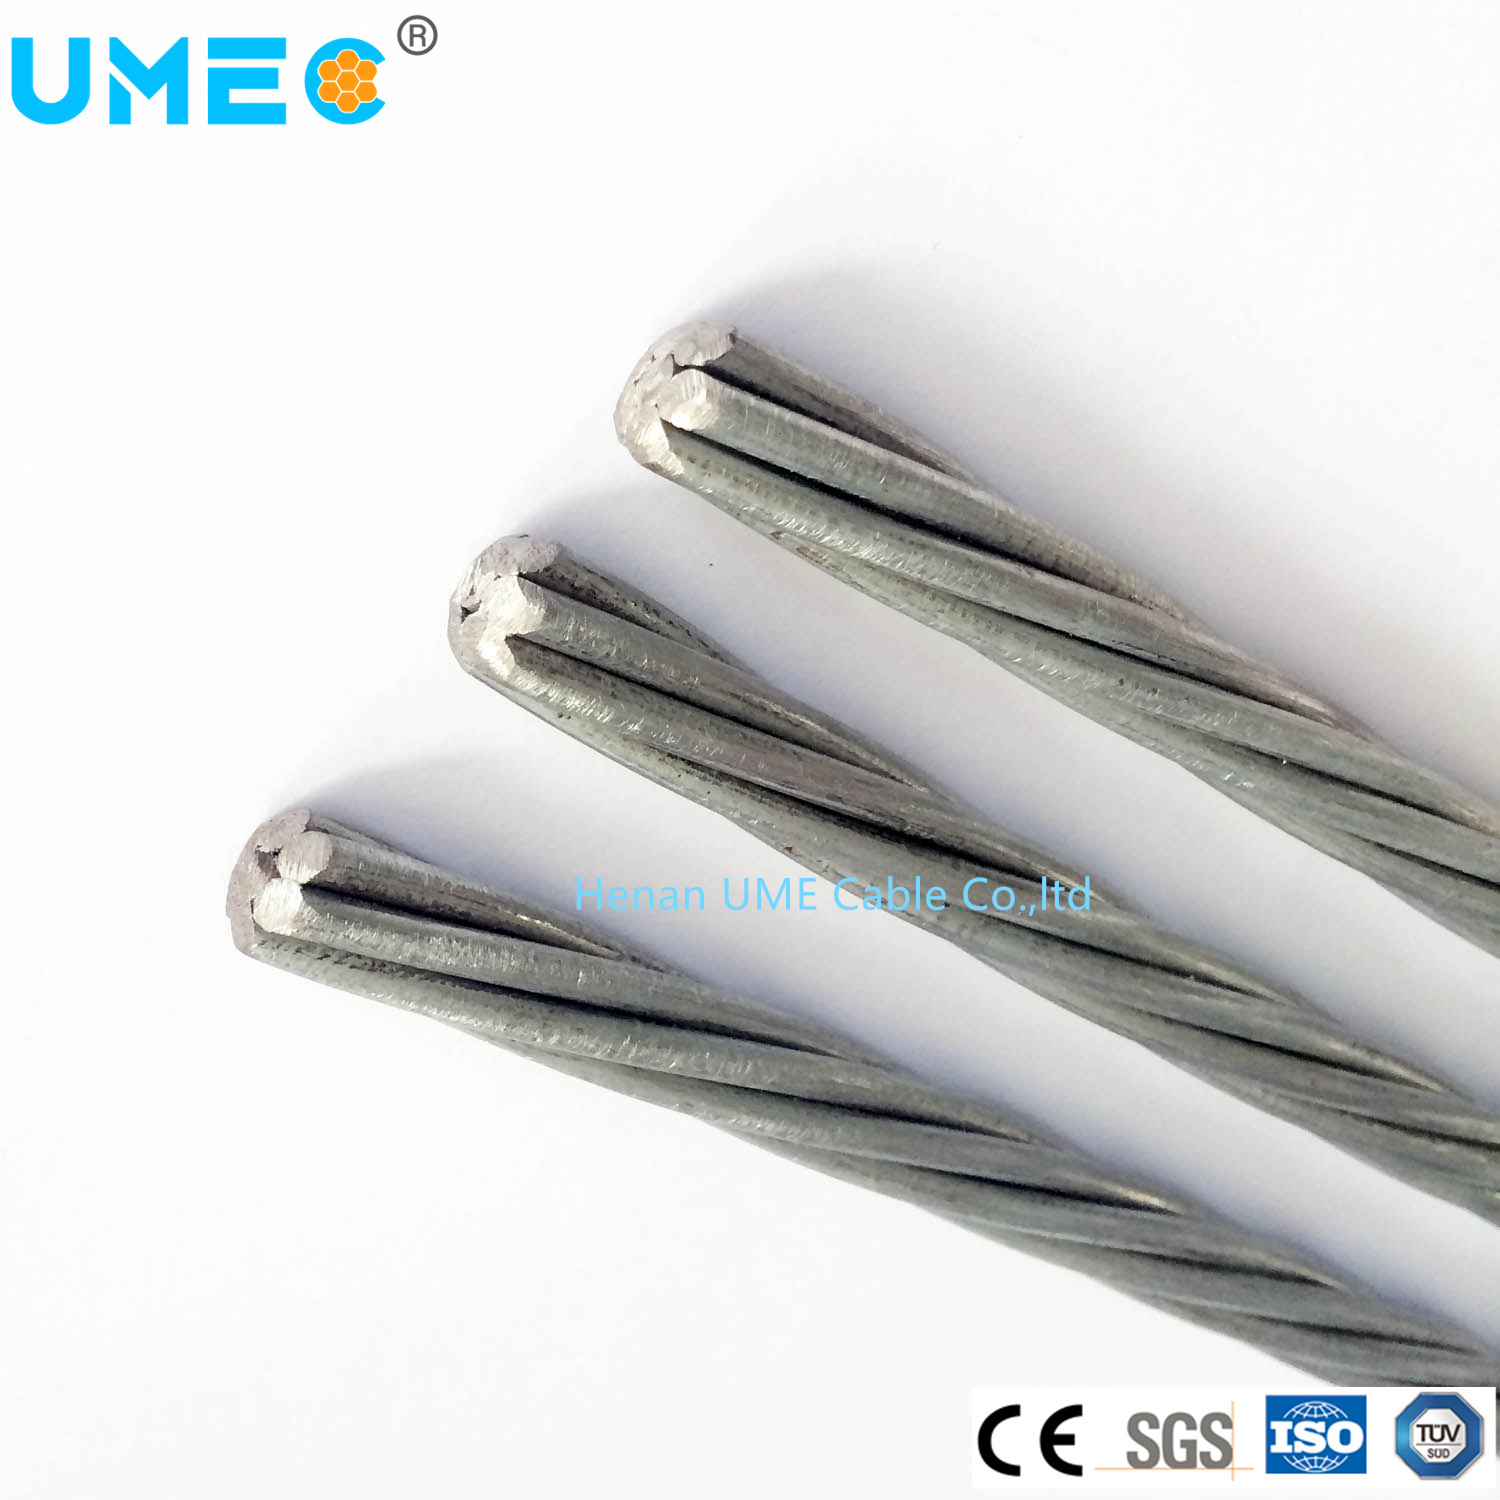 Exported Good Quality High Carbon Wire Rod Galvanized Steel Strand Point Contact Lay Rope